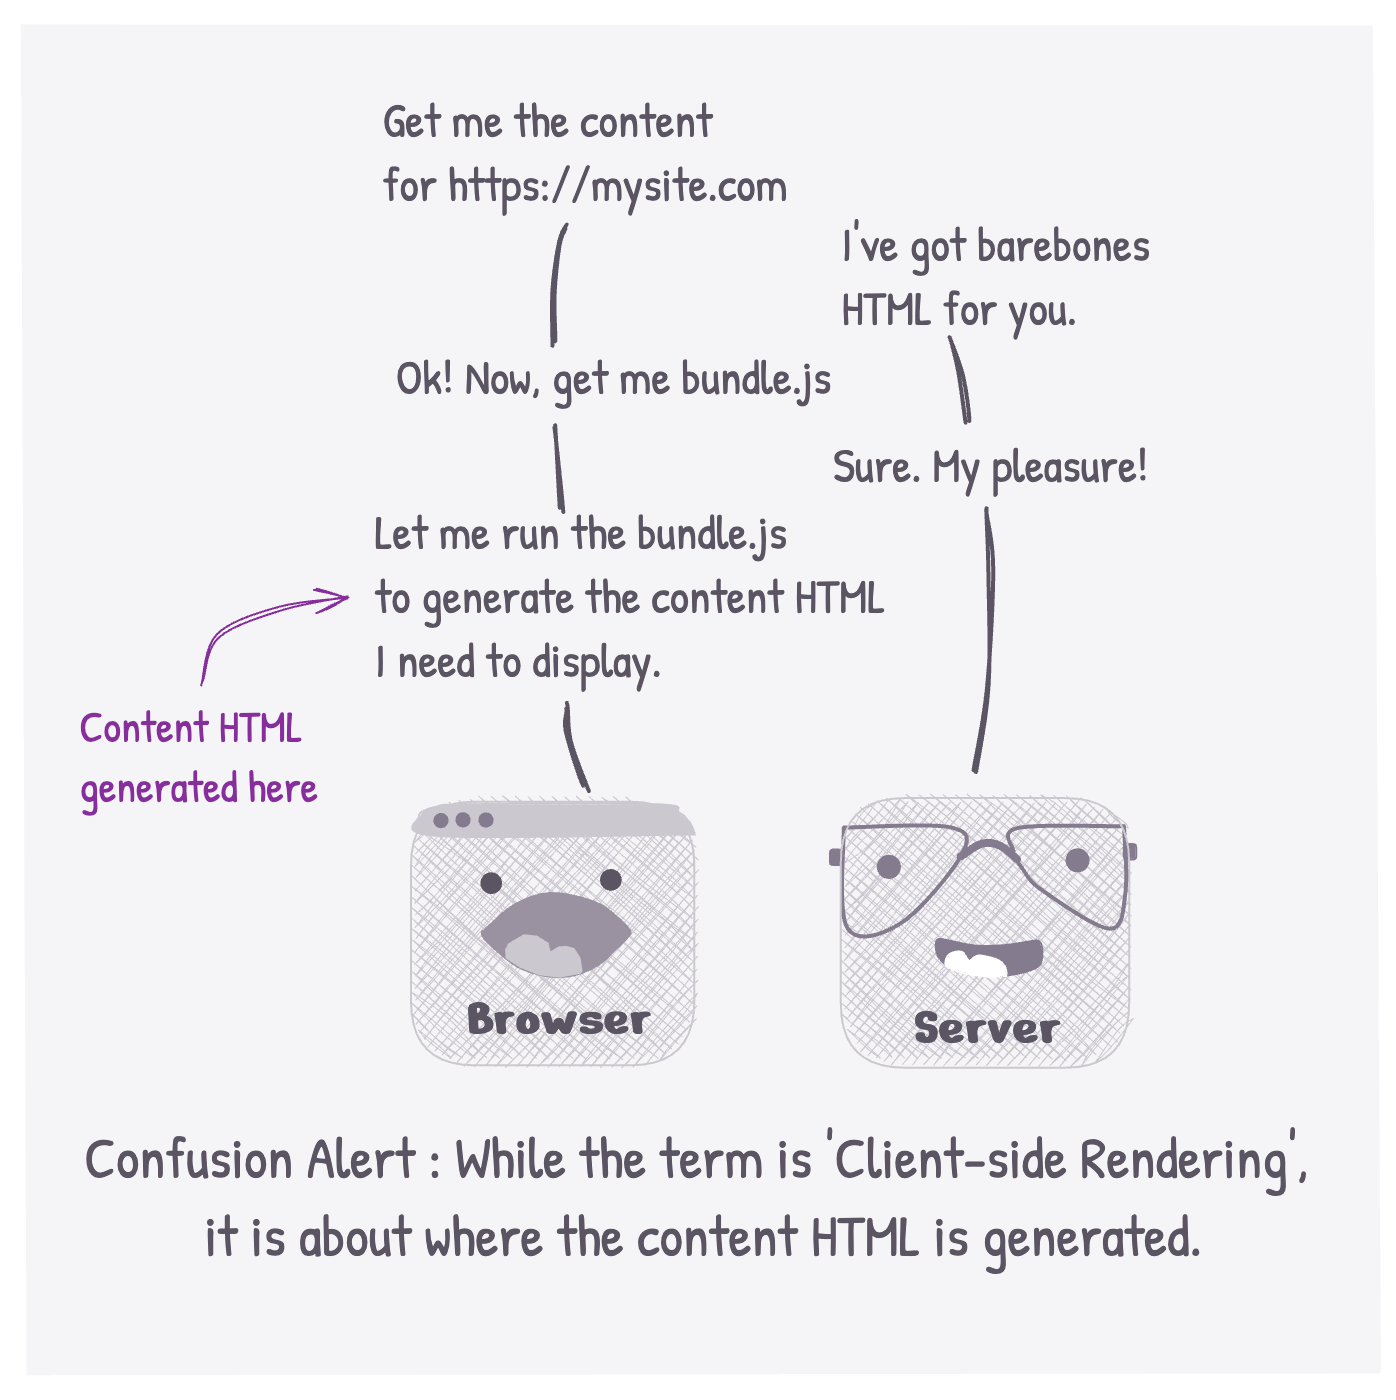 Is it about rendering or about generating the Content HTML?